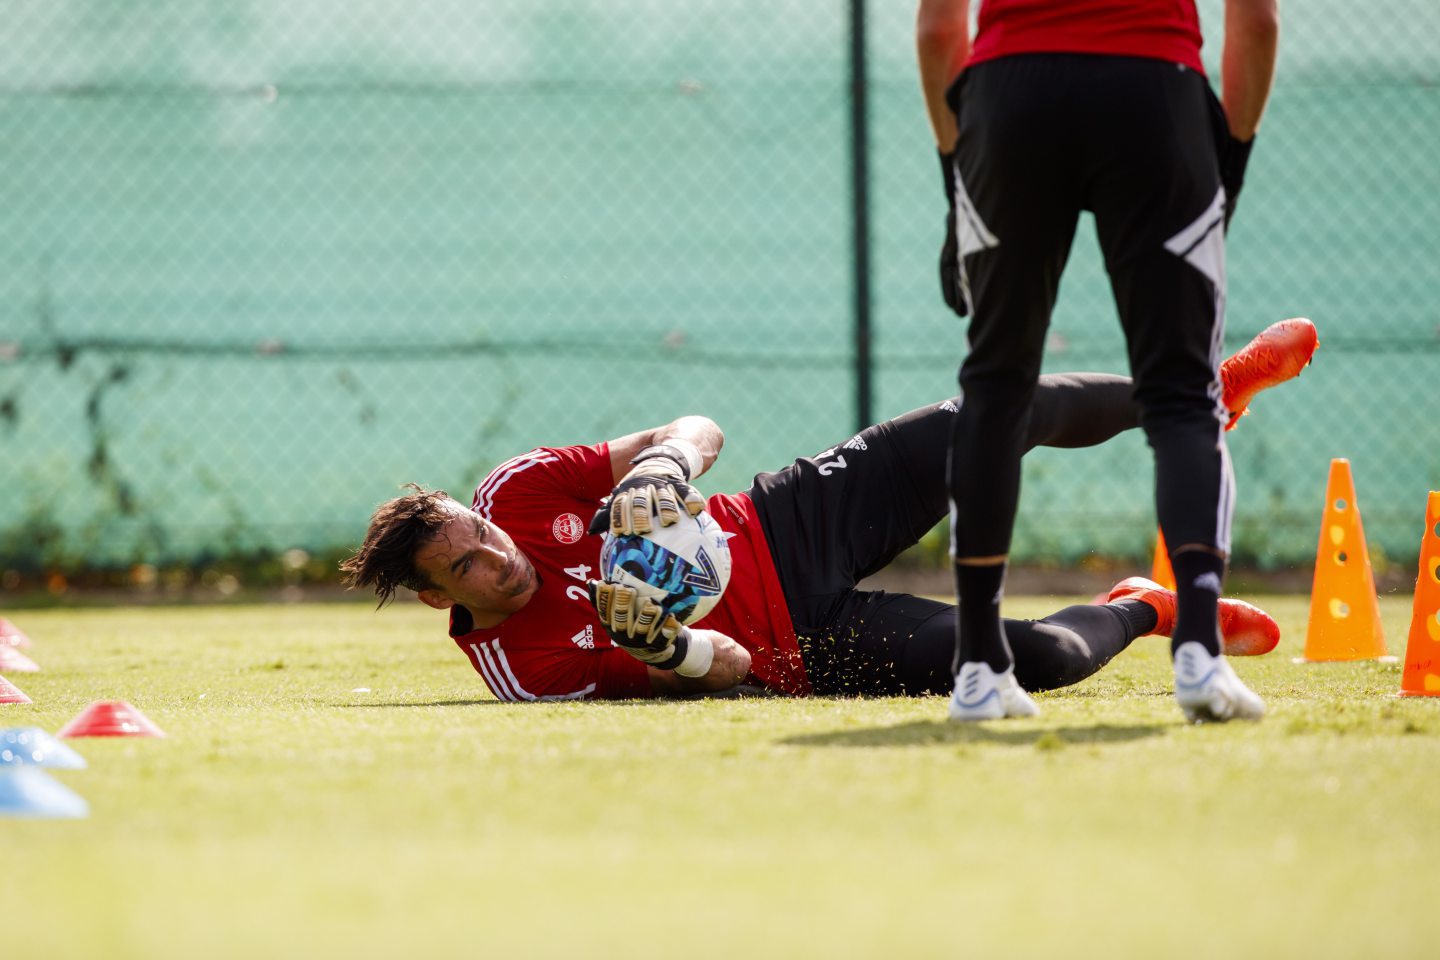 Aberdeen keeper Kelle Roos dives for the ball during training.